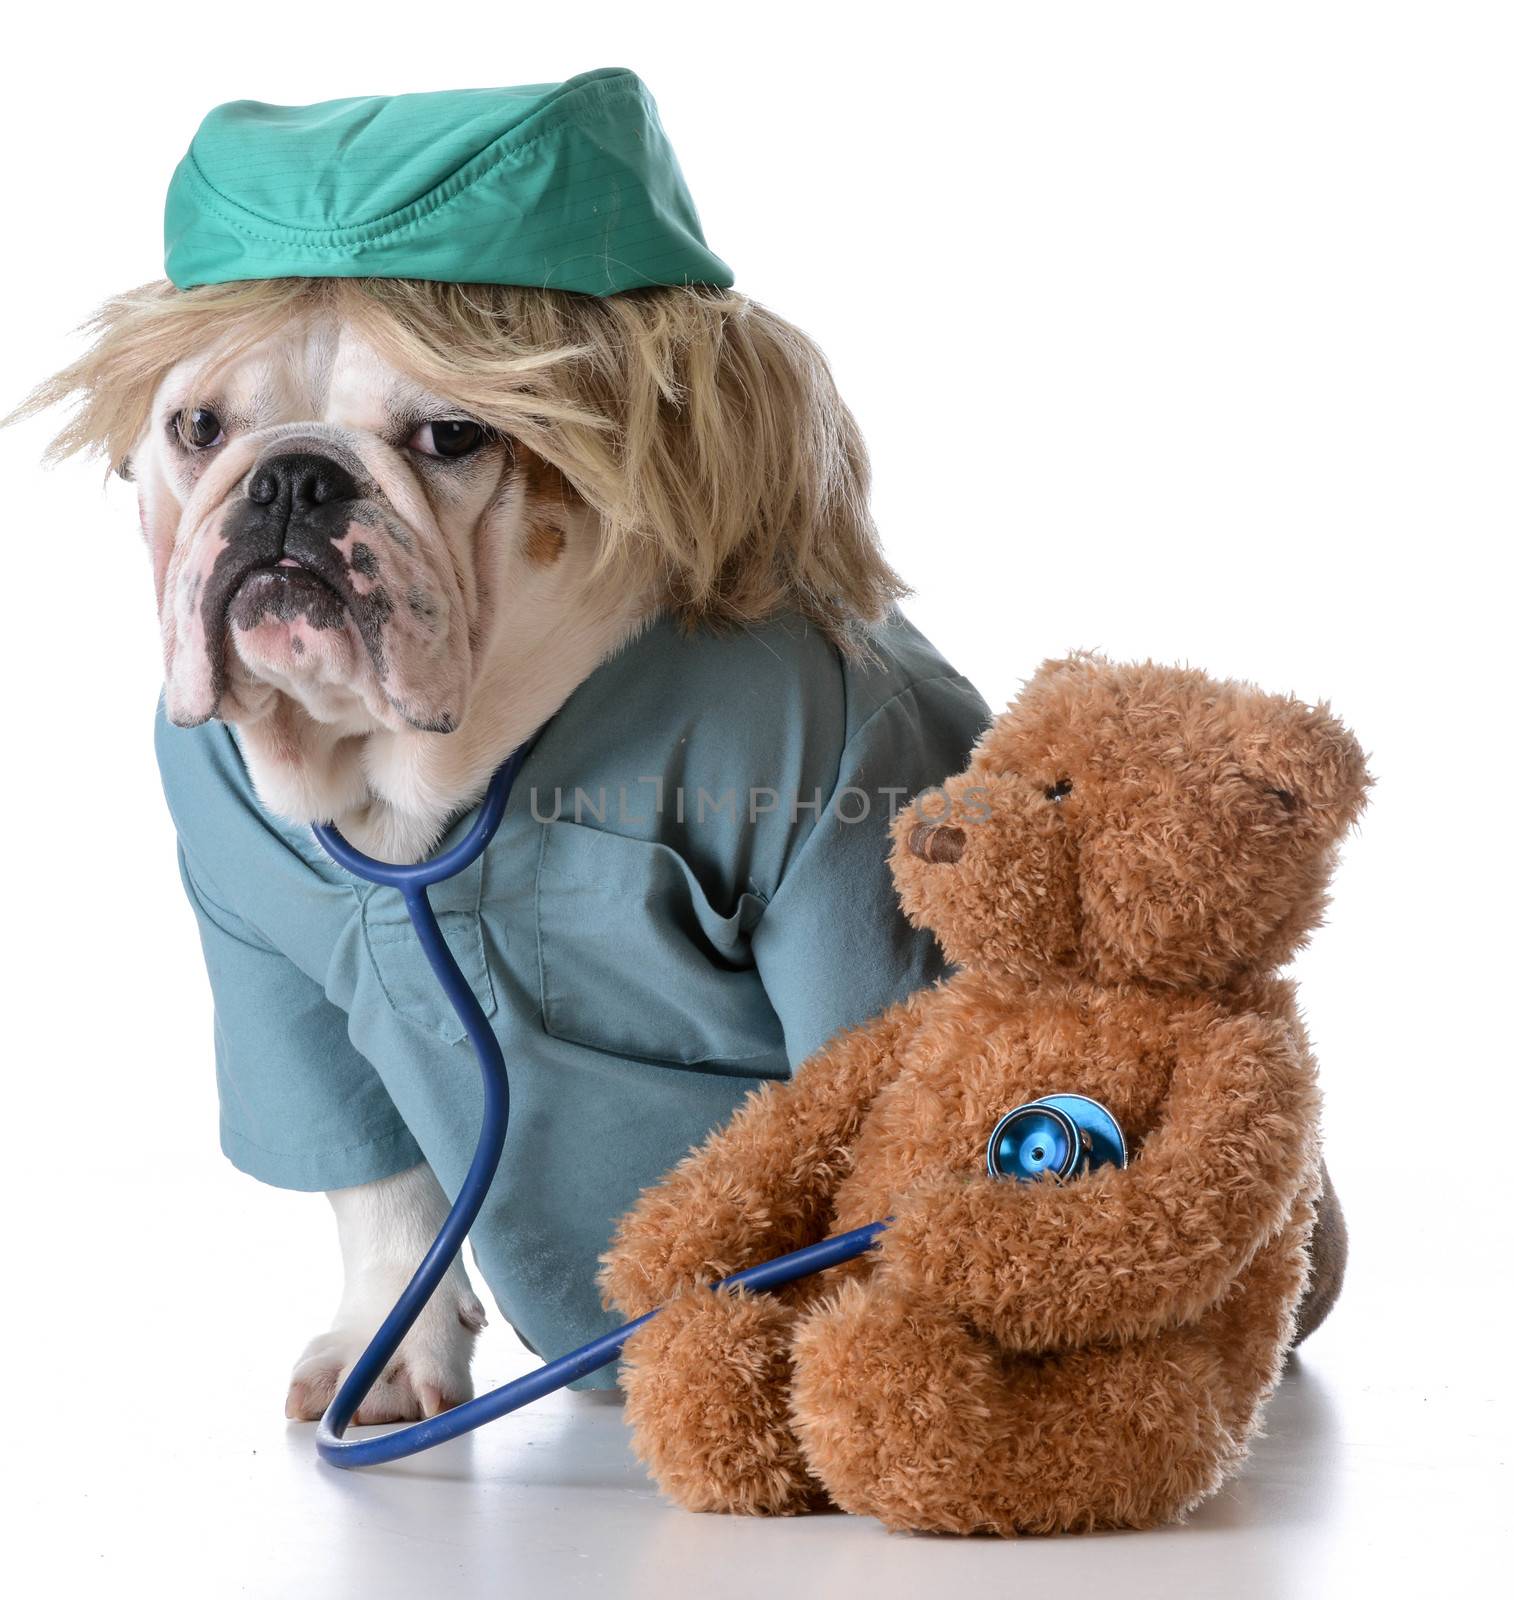 veterinary care - bulldog dressed like a doctor listening to the heart of a stuffed teddy bear